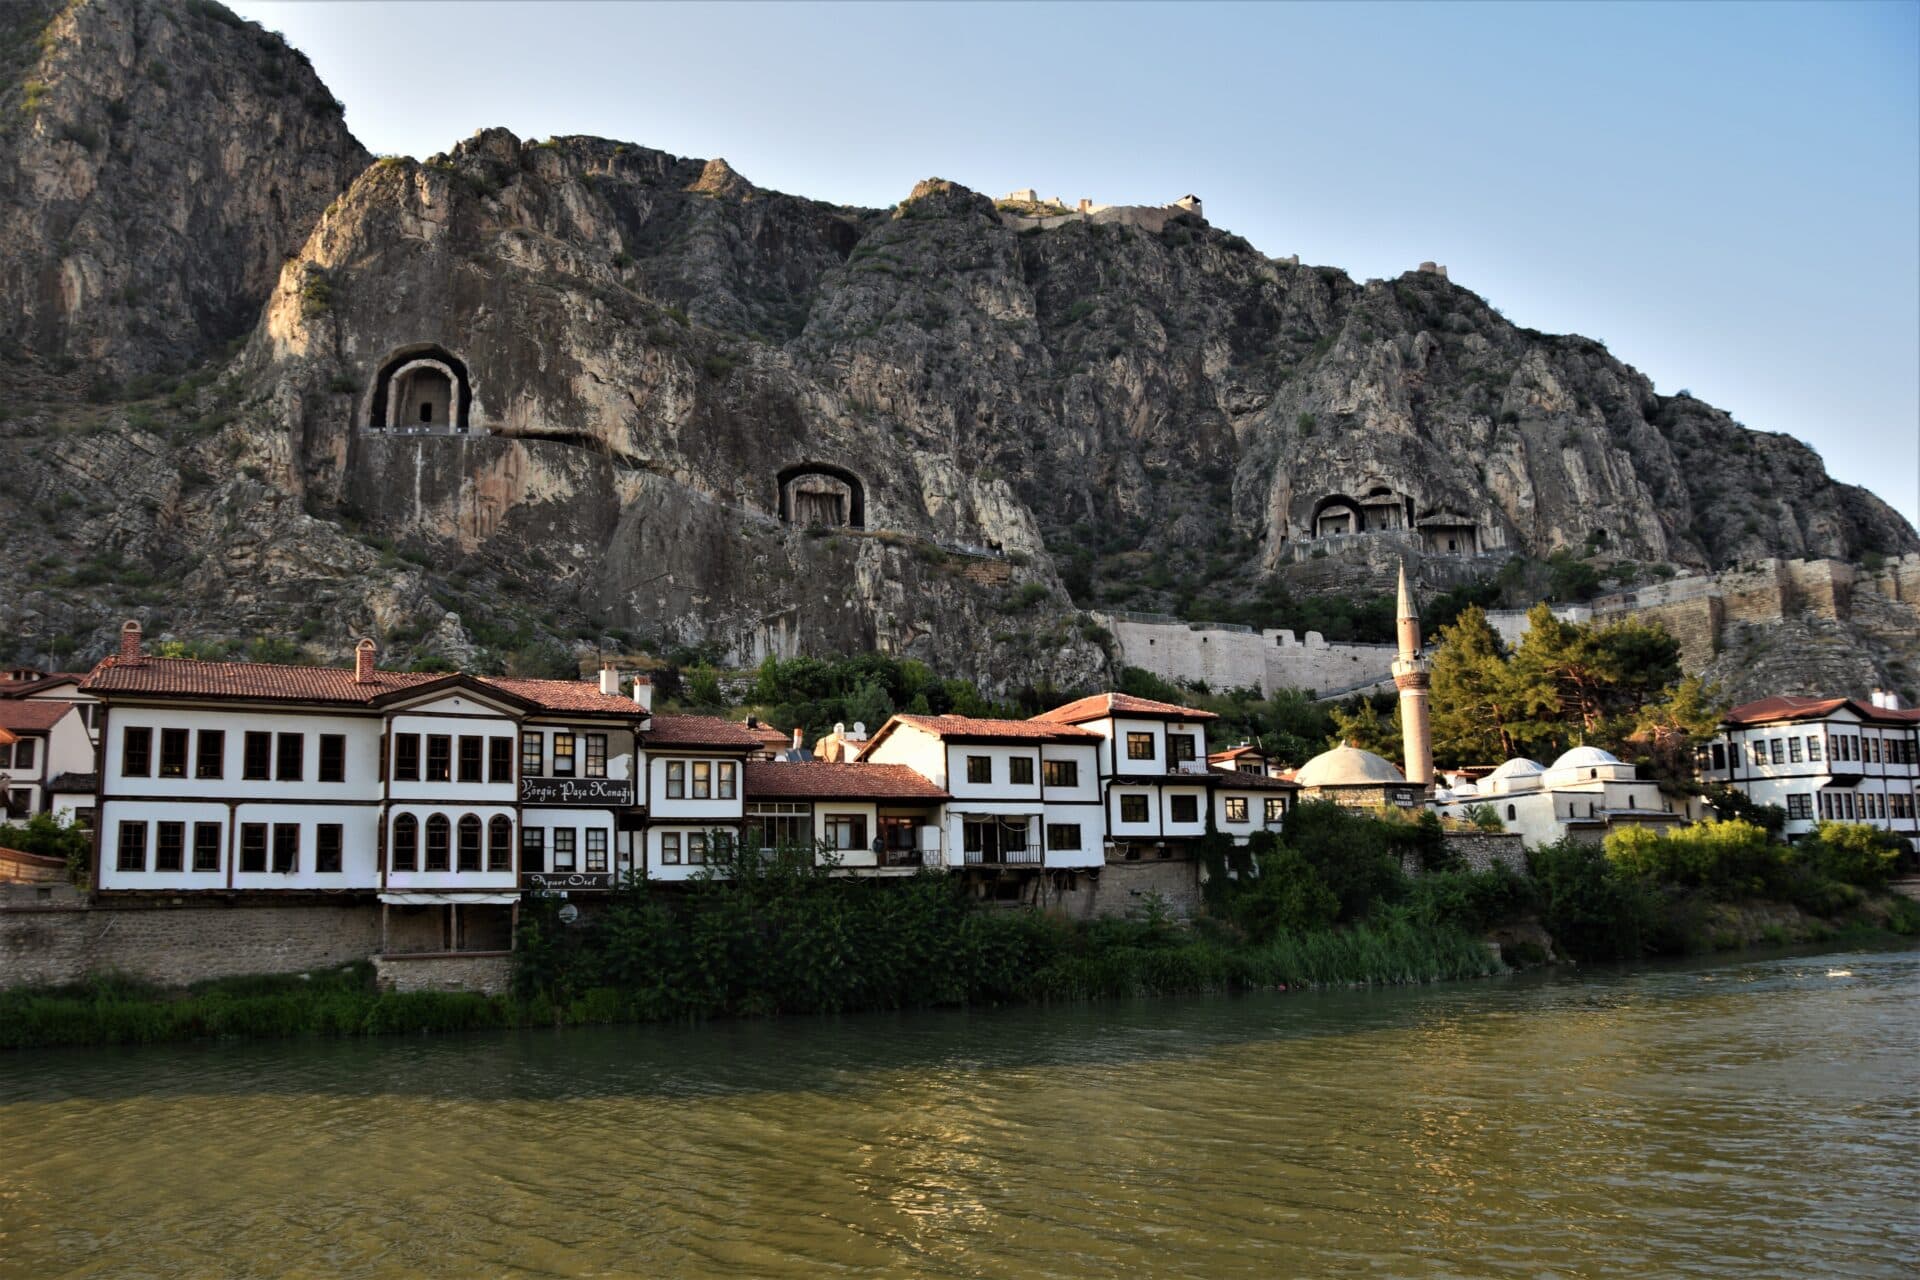 five monolithic rock tombs tower above whitewashed Ottoman-era buildings lining a river